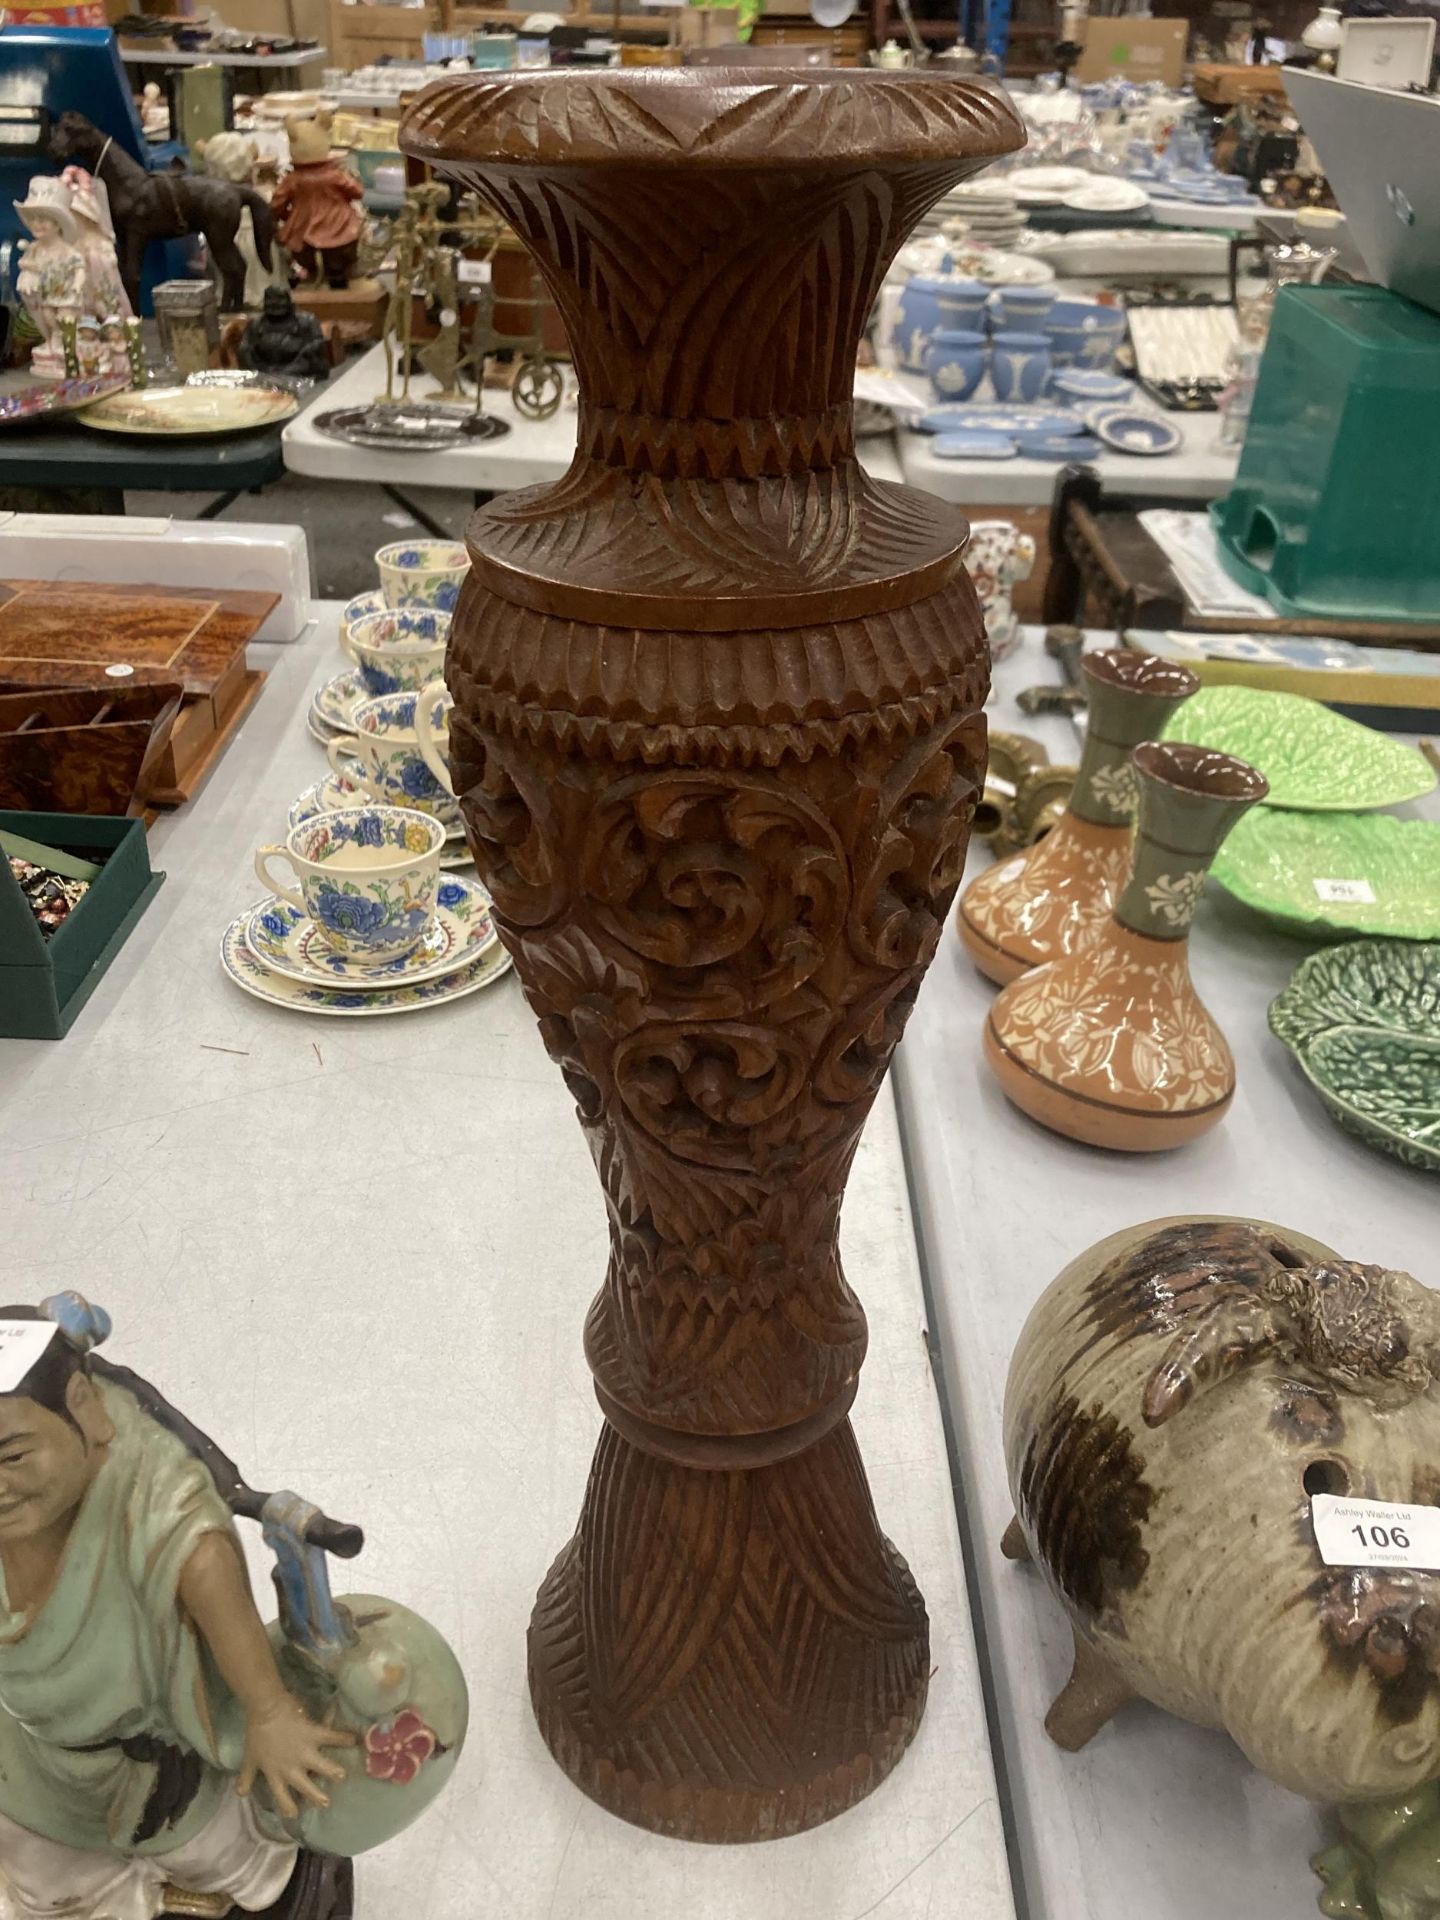 A LARGE HEAVILY CARVED WOODEN VASE, HEIGHT 50CM